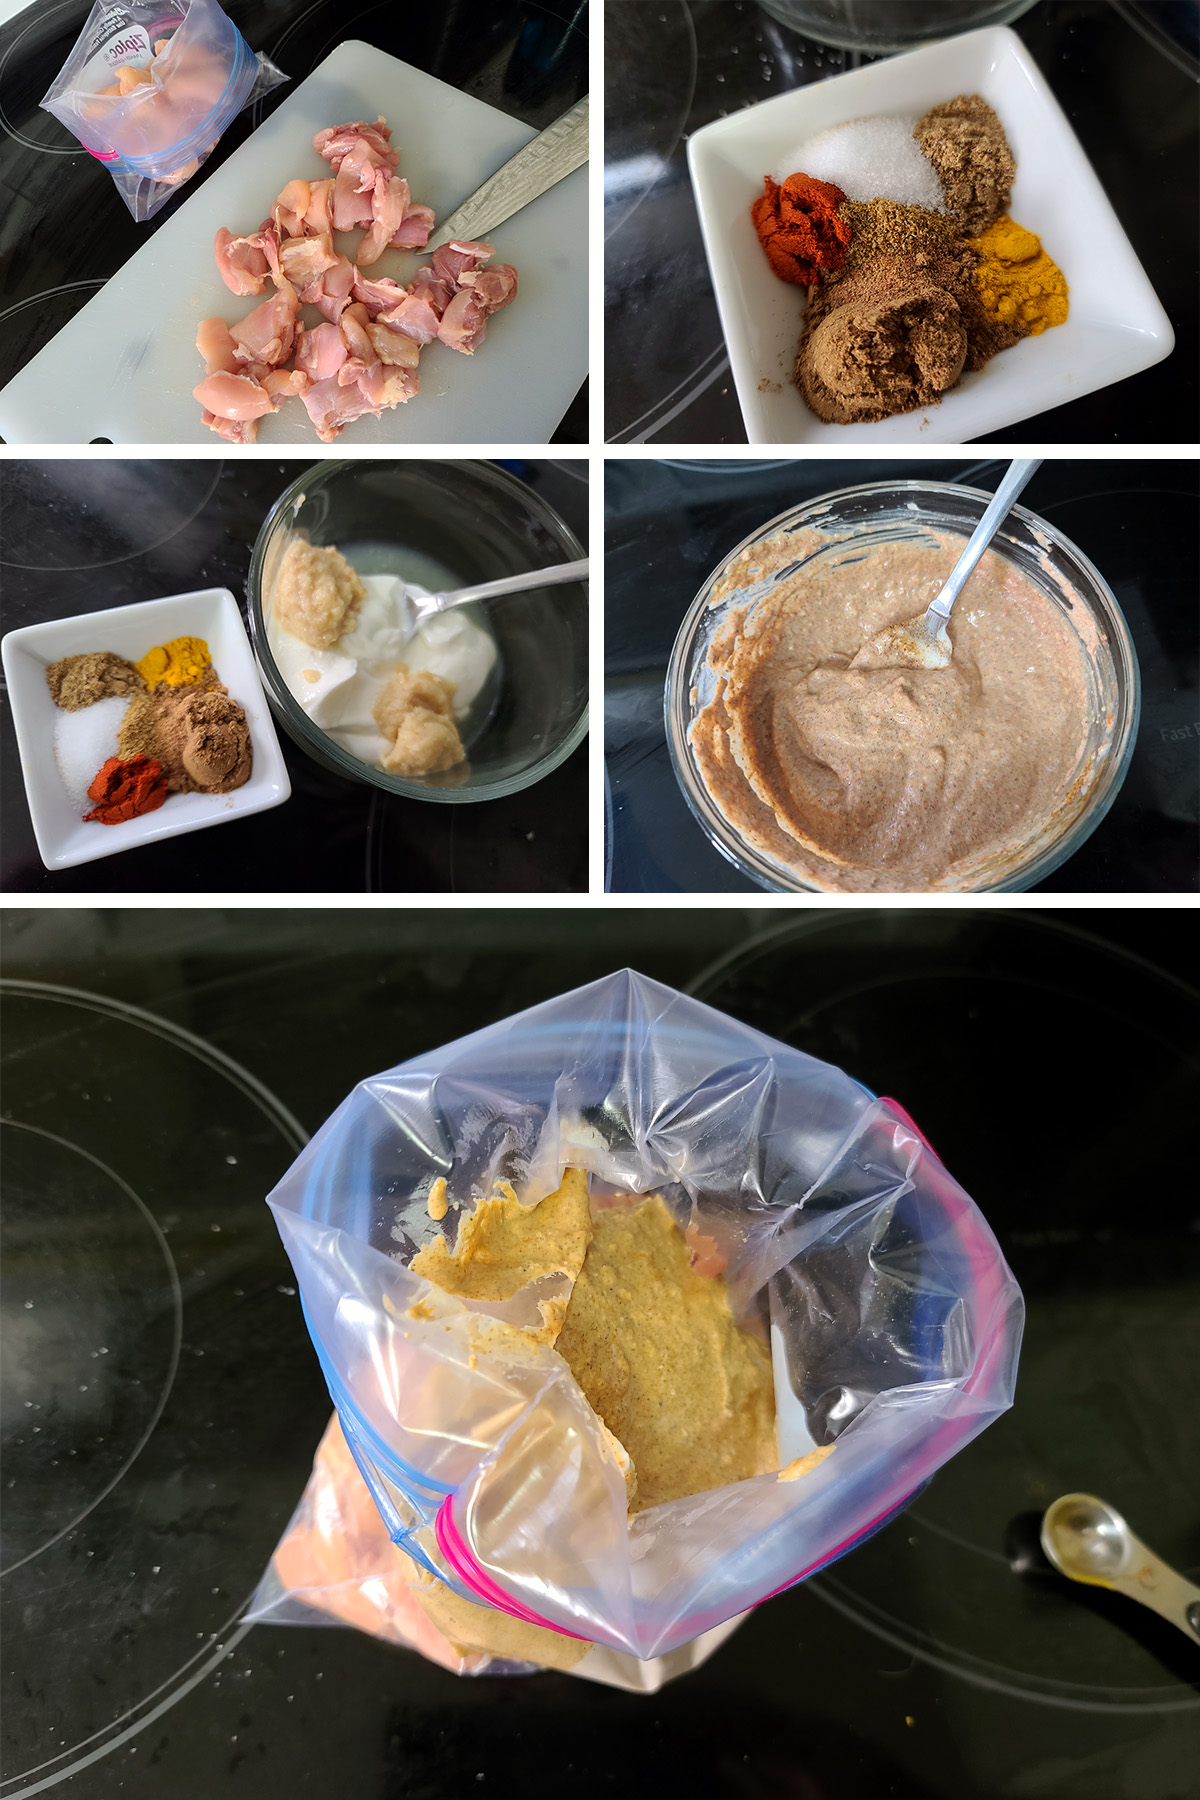 A 5 part image showing the chicken being cut, marinade being made, and chicken and marinade being placed in a baggie.